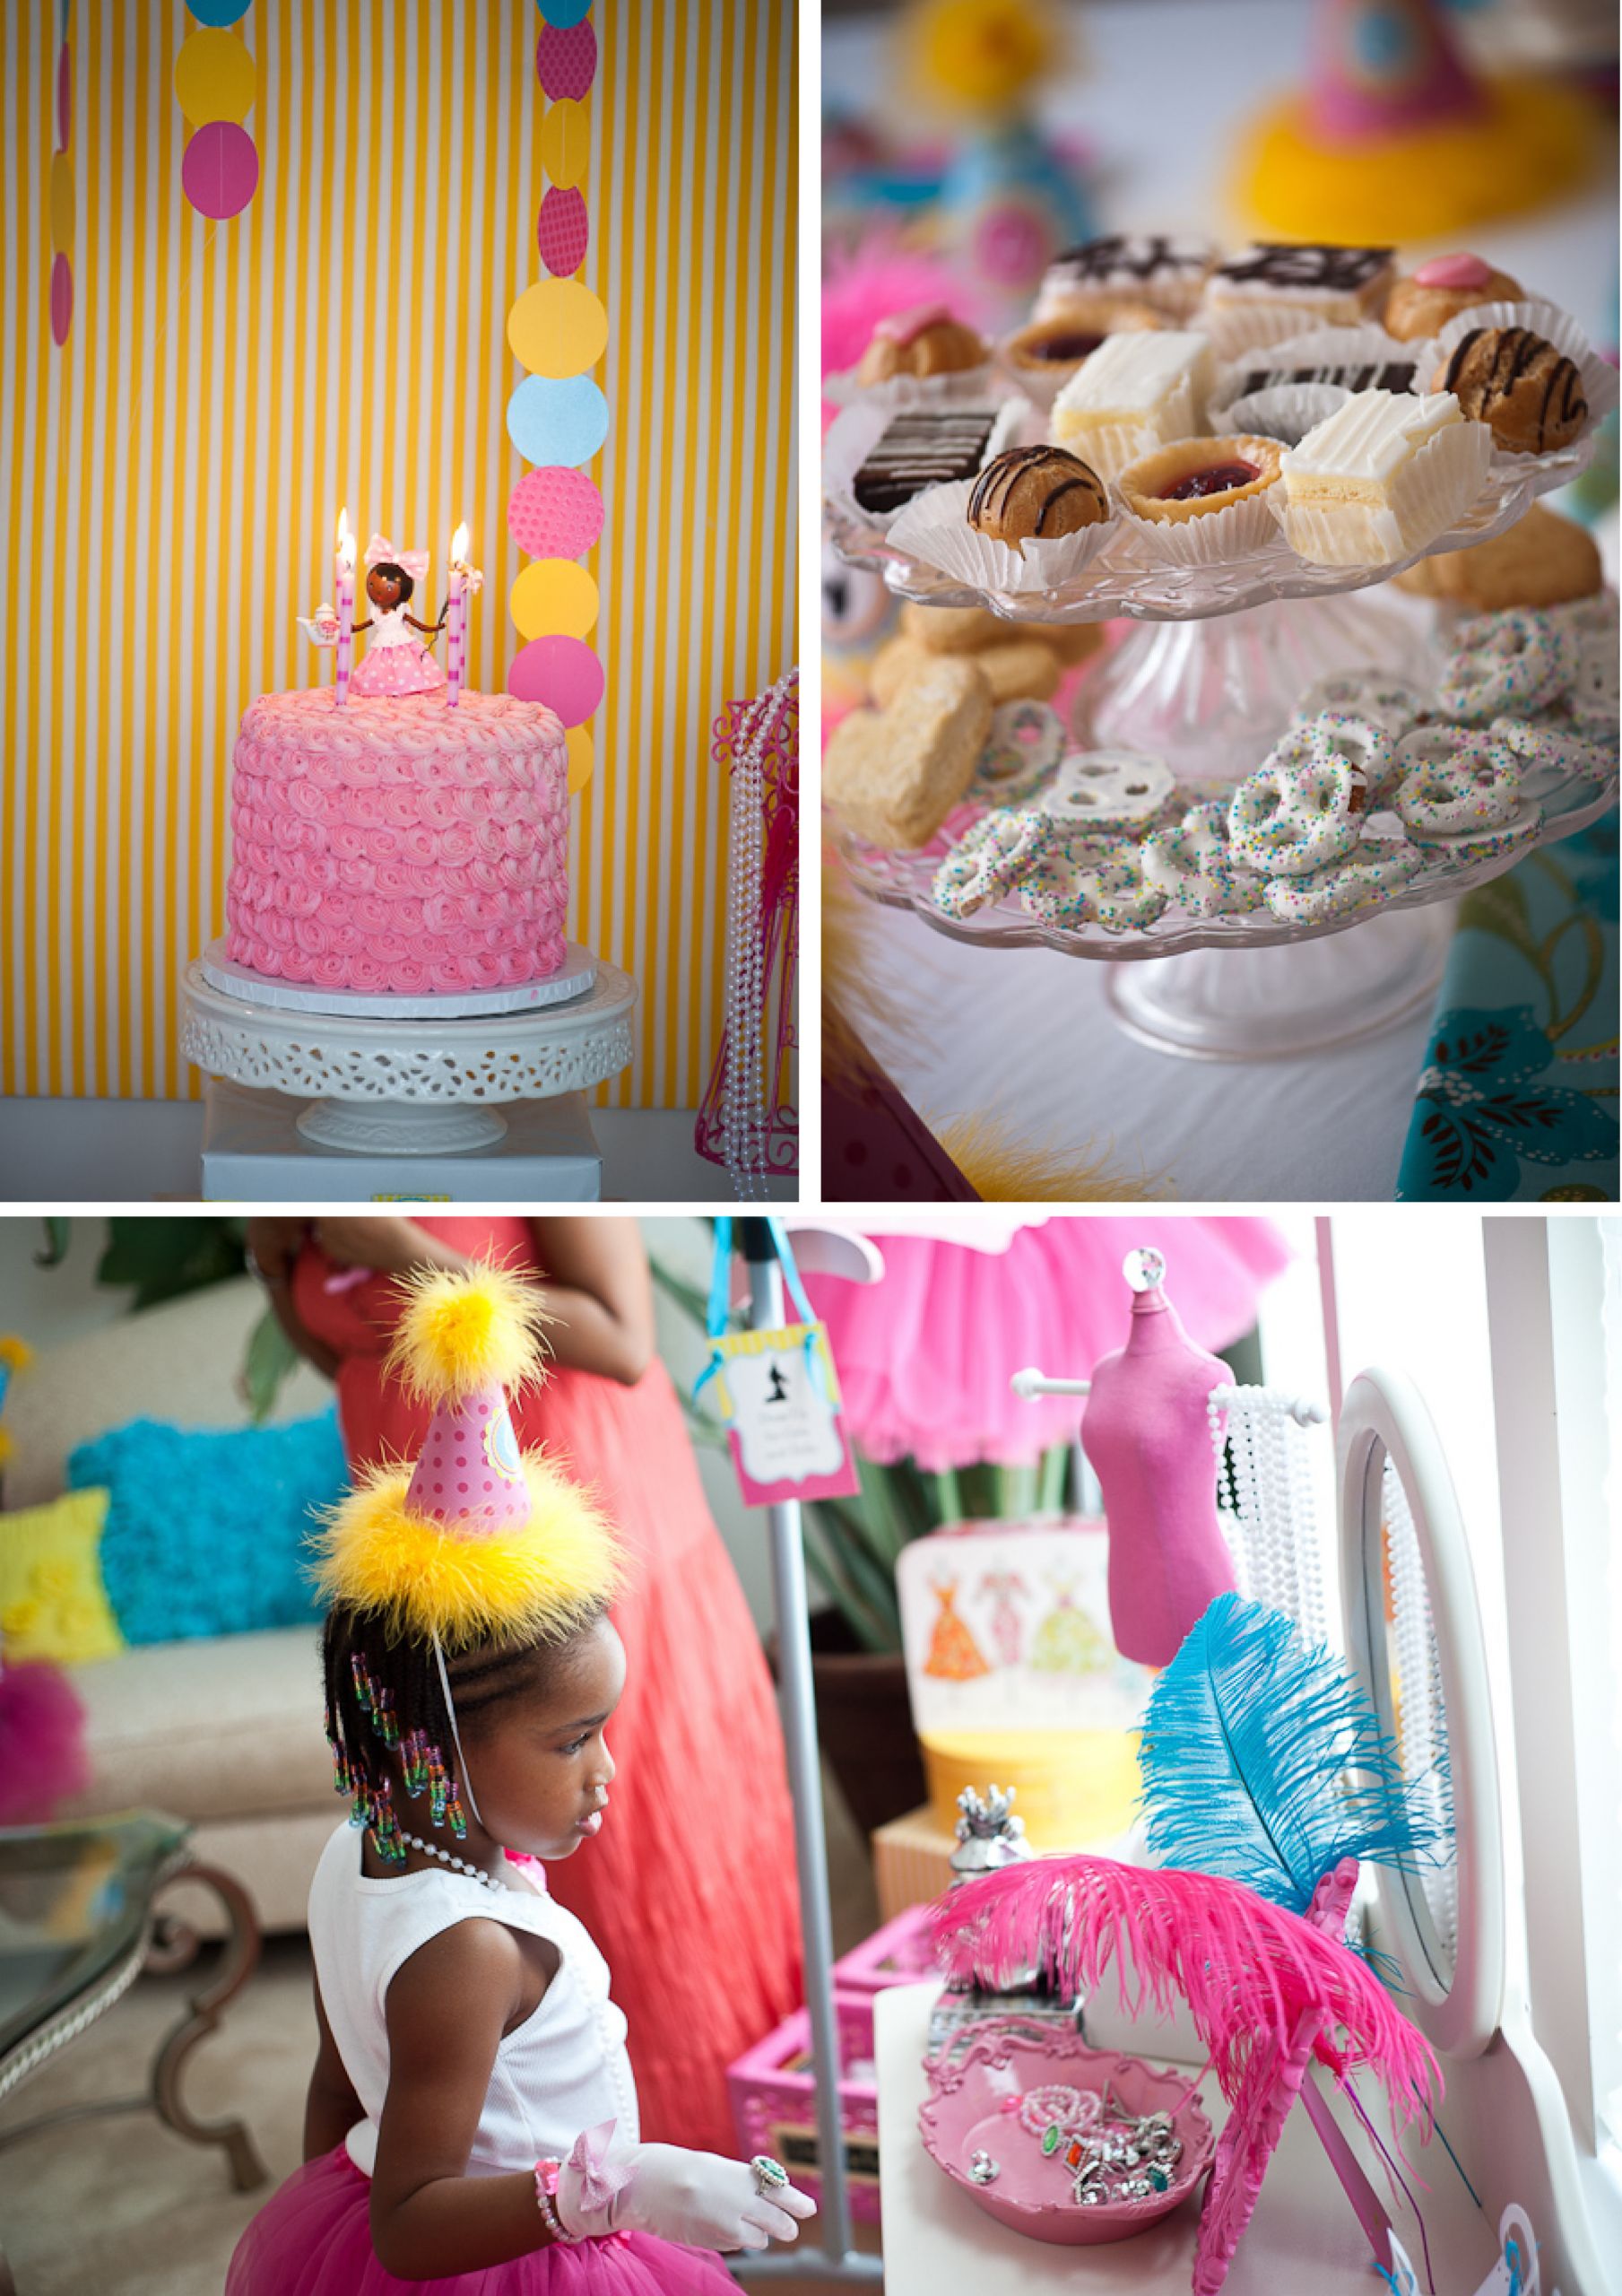 Tea Party Setup Ideas
 A Precious Tea Party with Tutus and Baby Dolls Anders